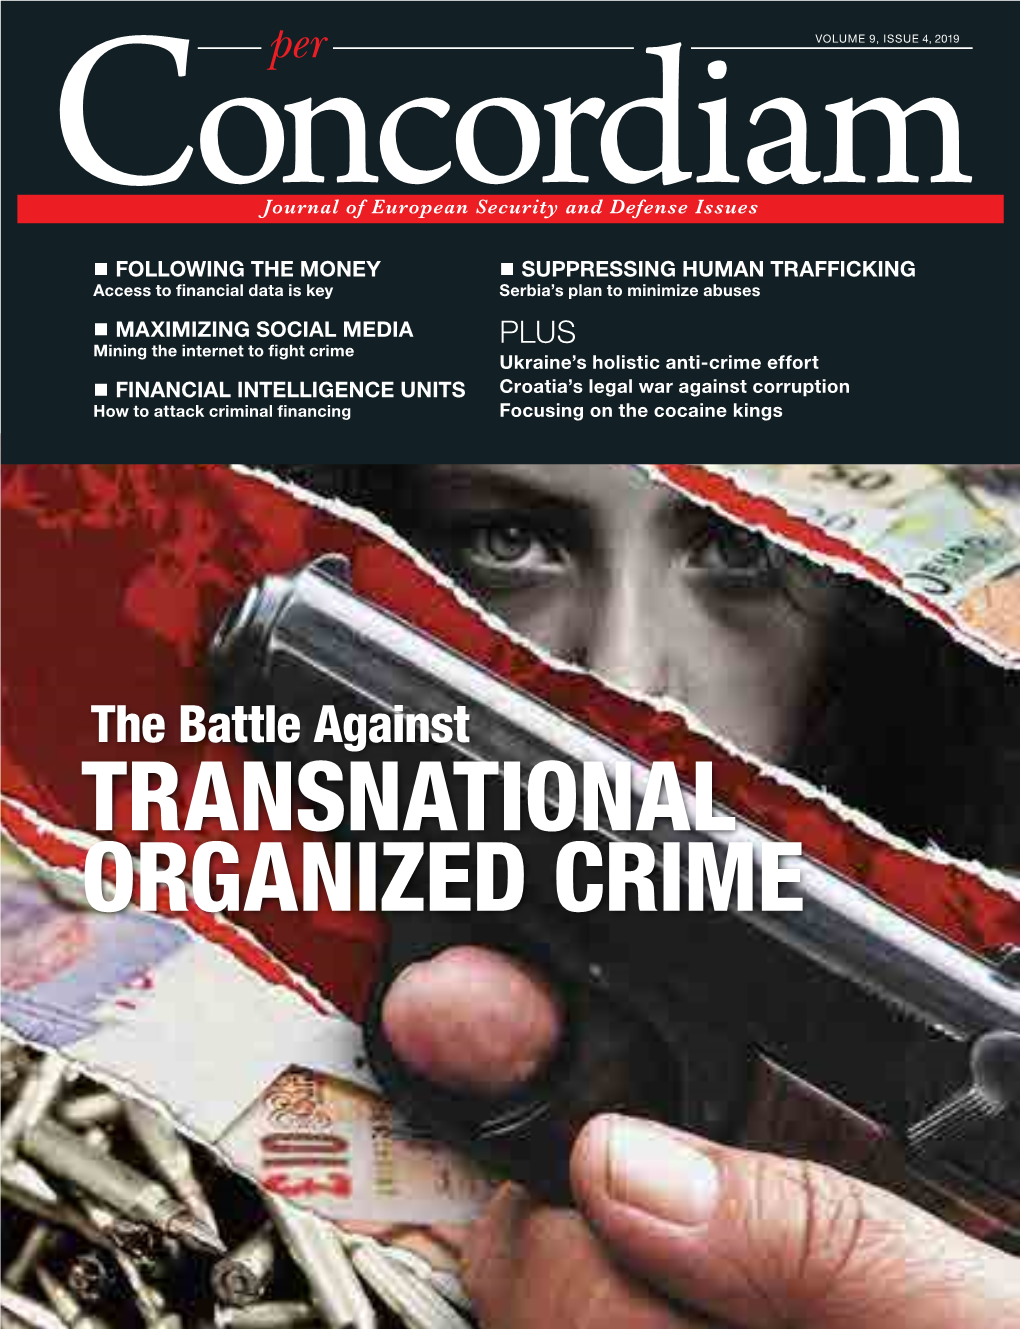 TRANSNATIONAL ORGANIZED CRIME TABLE of CONTENTS Features